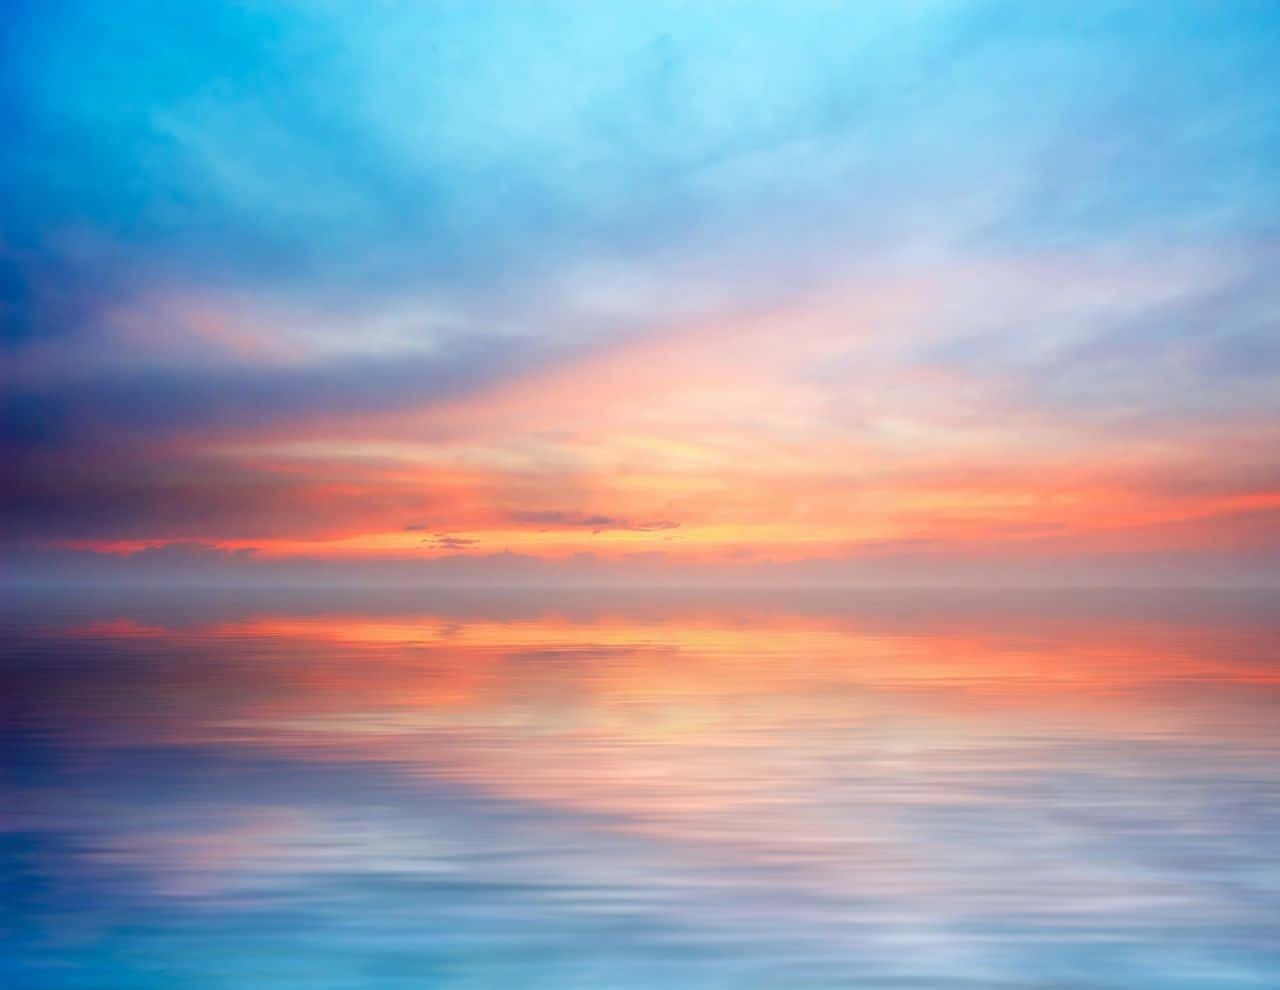 Feel inspired as you contemplate the vast blue horizon. Wallpaper